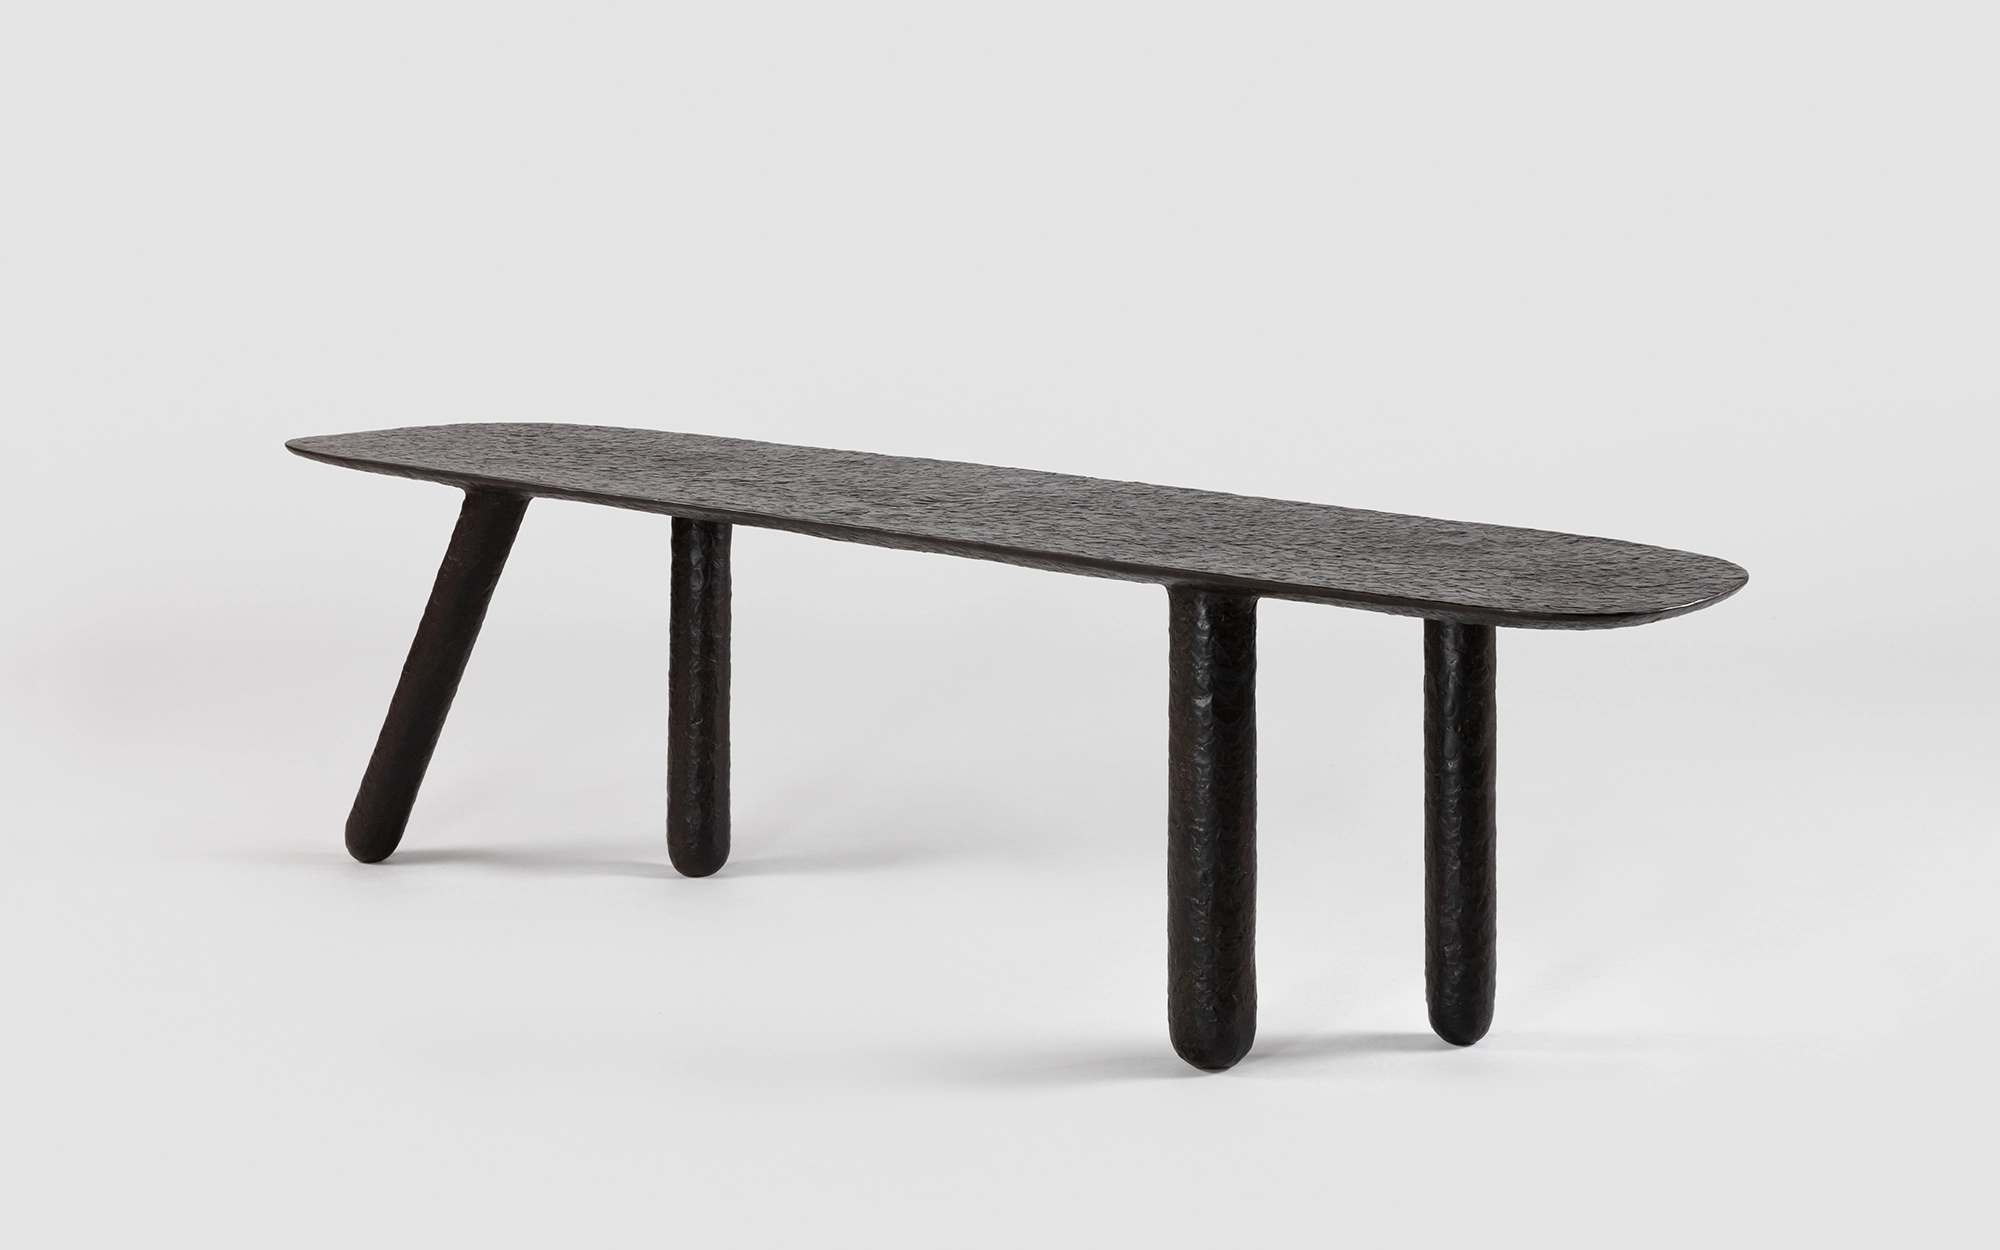 Bench 165 - Guillaume Bardet - Coffee table - Galerie kreo